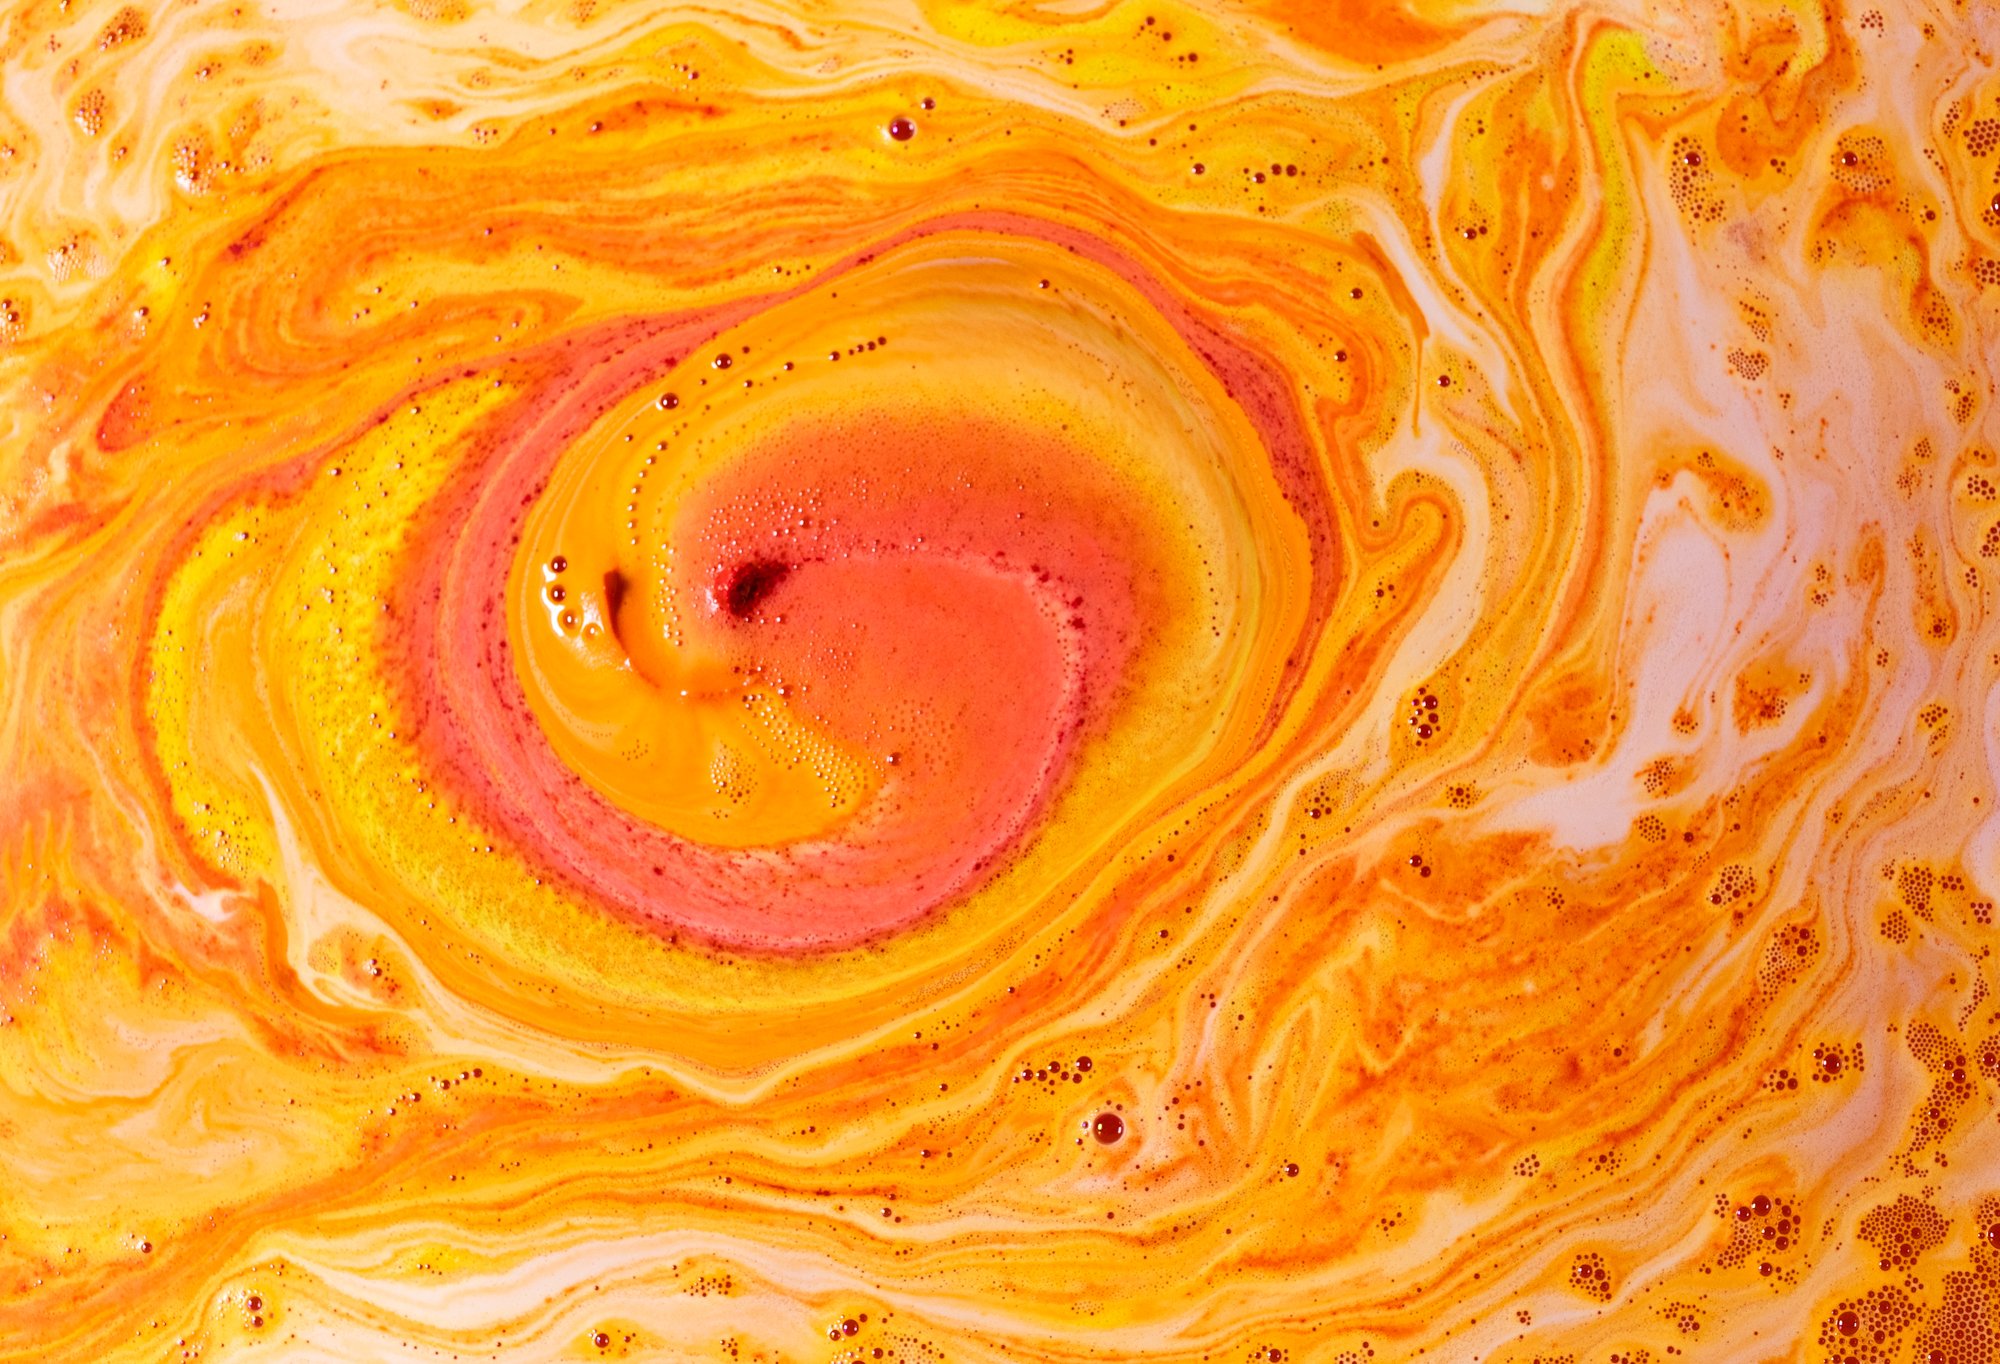 Flame-Flame Fruit bath bomb transforms waters into a flame-like fizz of yellows, oranges and reds - replicating fires' flames.